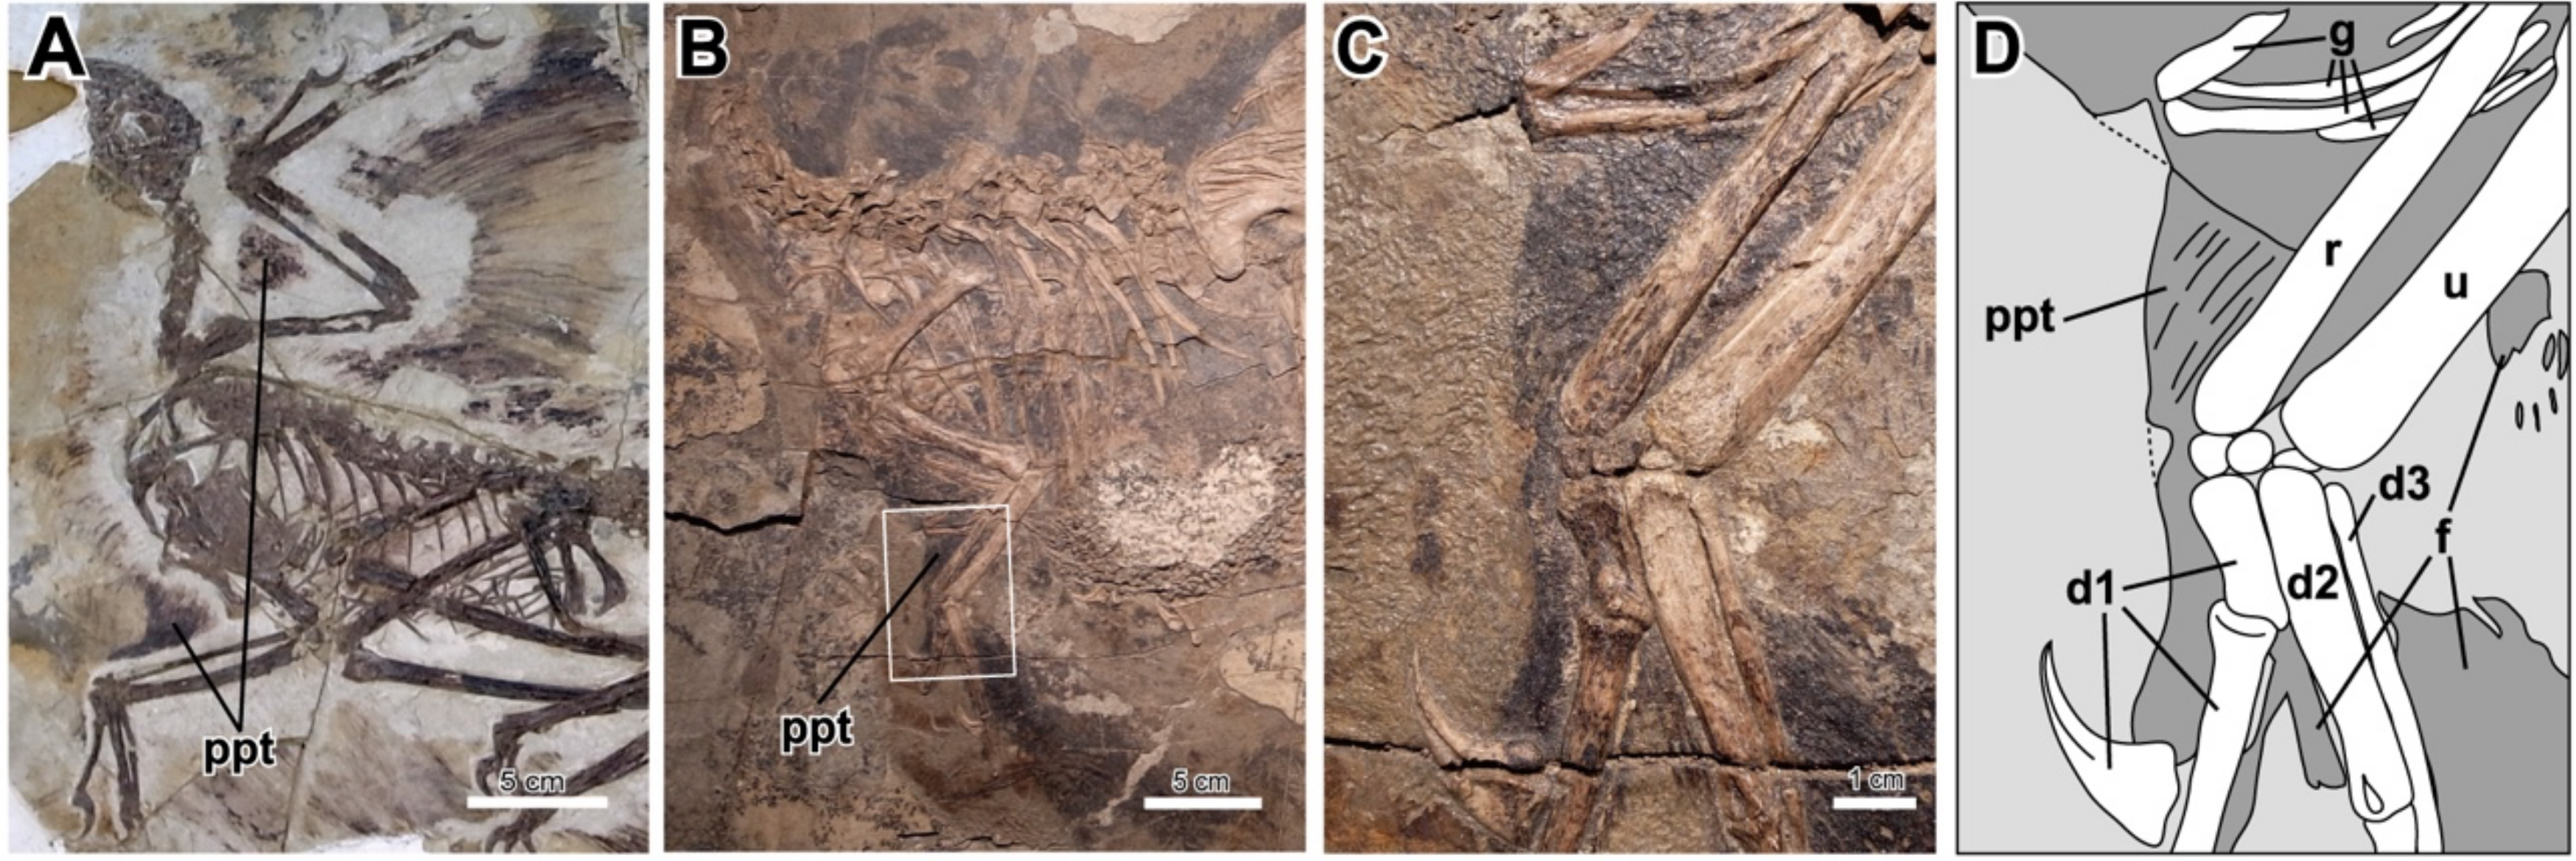 Three photographs and one line drawing of a dinosaur fossil